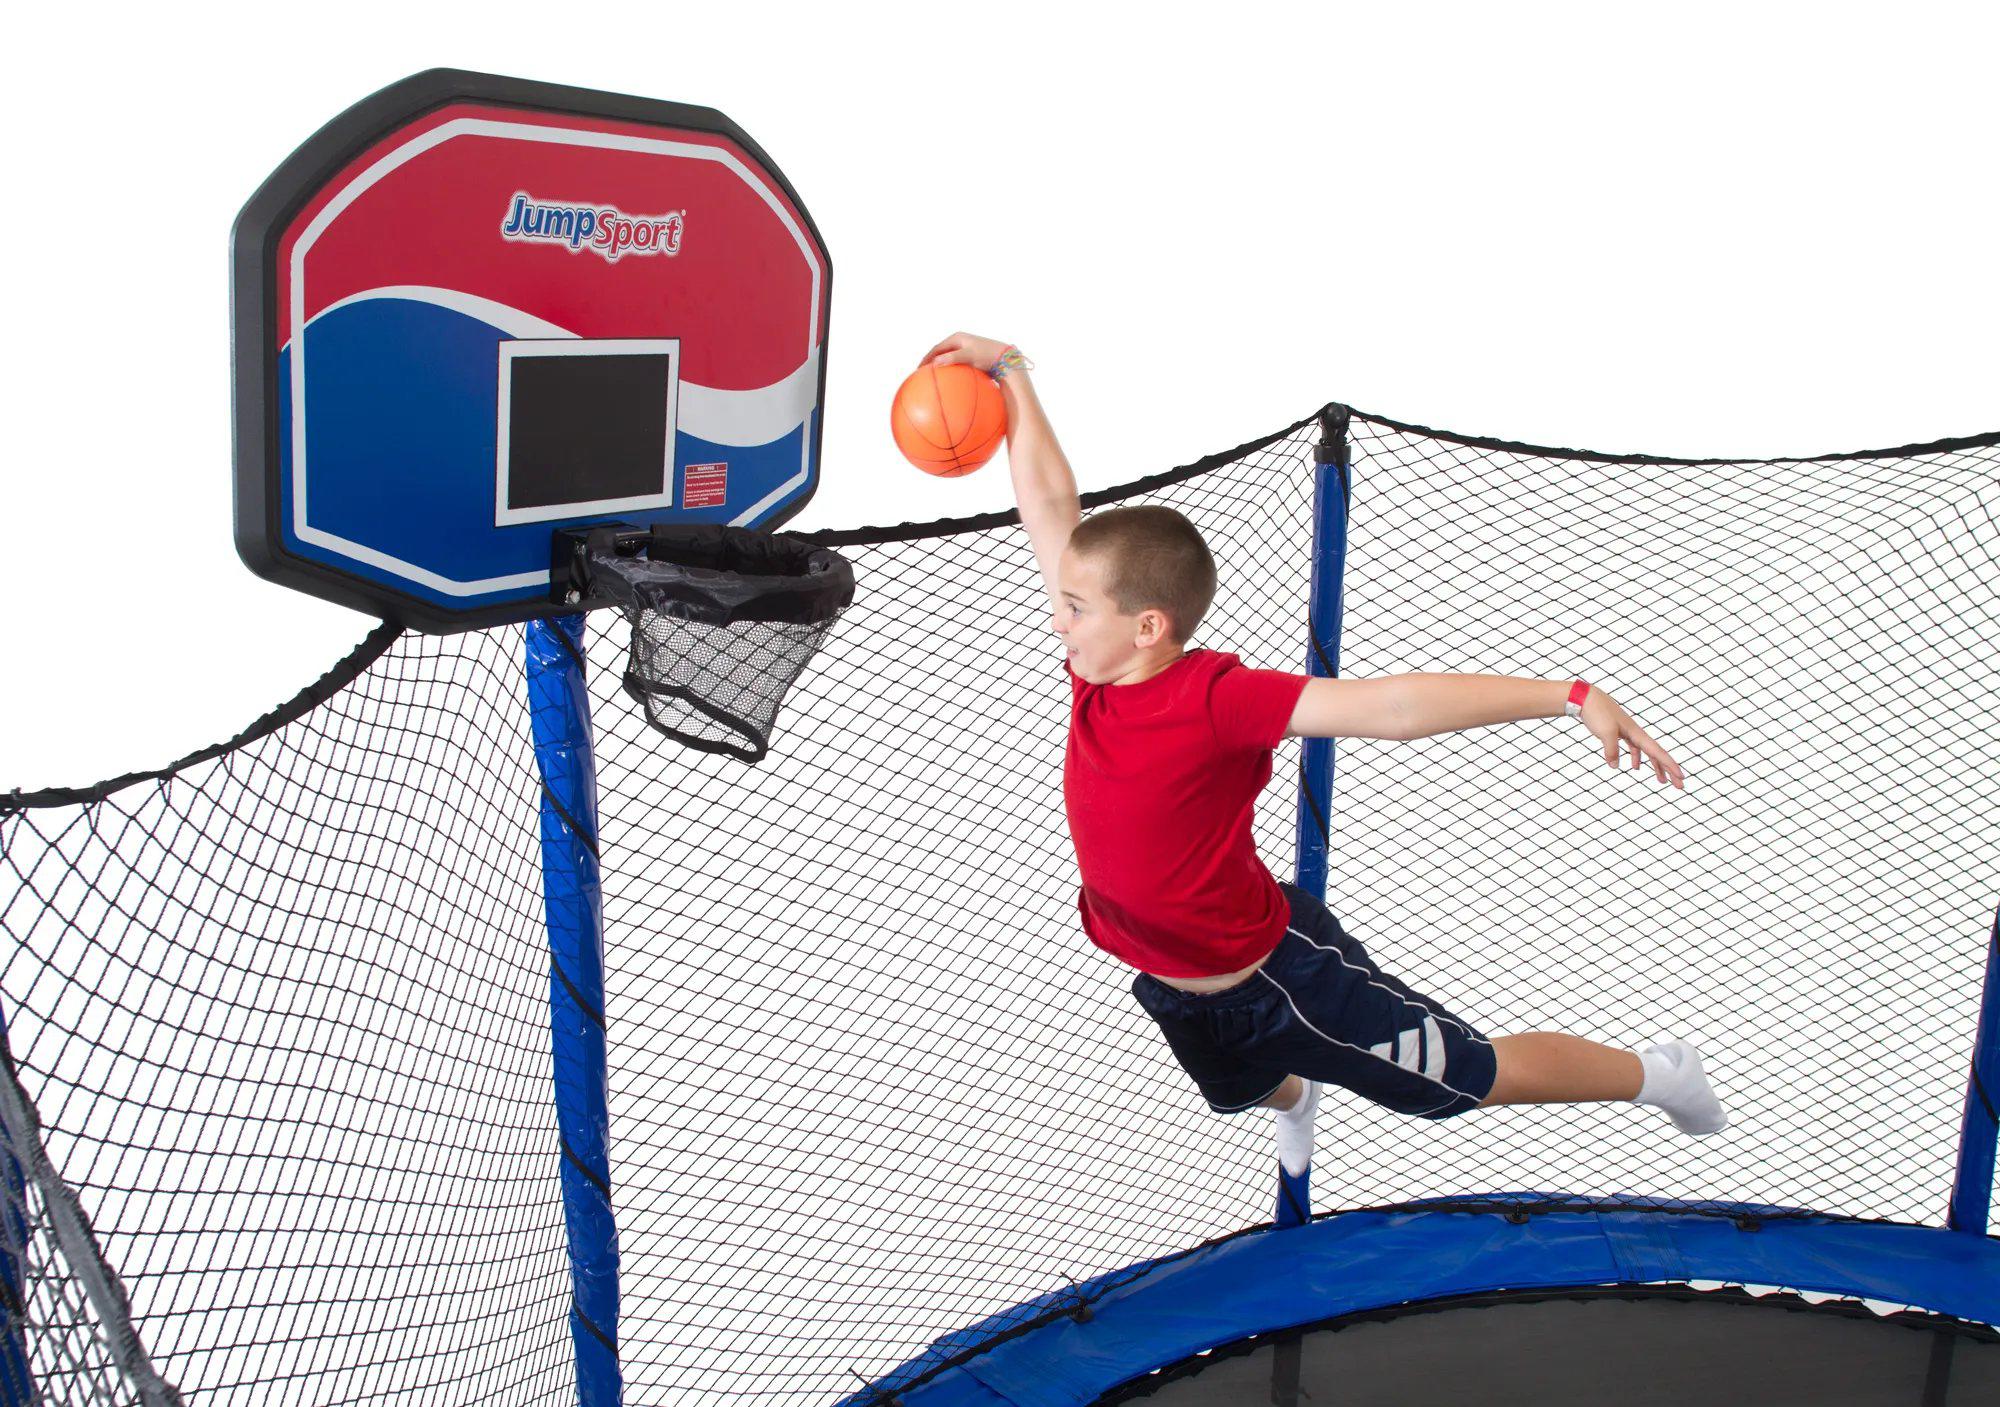 Slam dunk like a PRO with our flexible ProFlex rim!
👉Designed to fit securely on your JumpSport Trampoline Safety Net Enclosure!
👉Includes Backboard, cushioned hoop with Heavy-duty ProFlex hardware, and inflatable ball!
Happy Backyards - Call (615) 595-5582 to start building backyard memories that last a lifetime